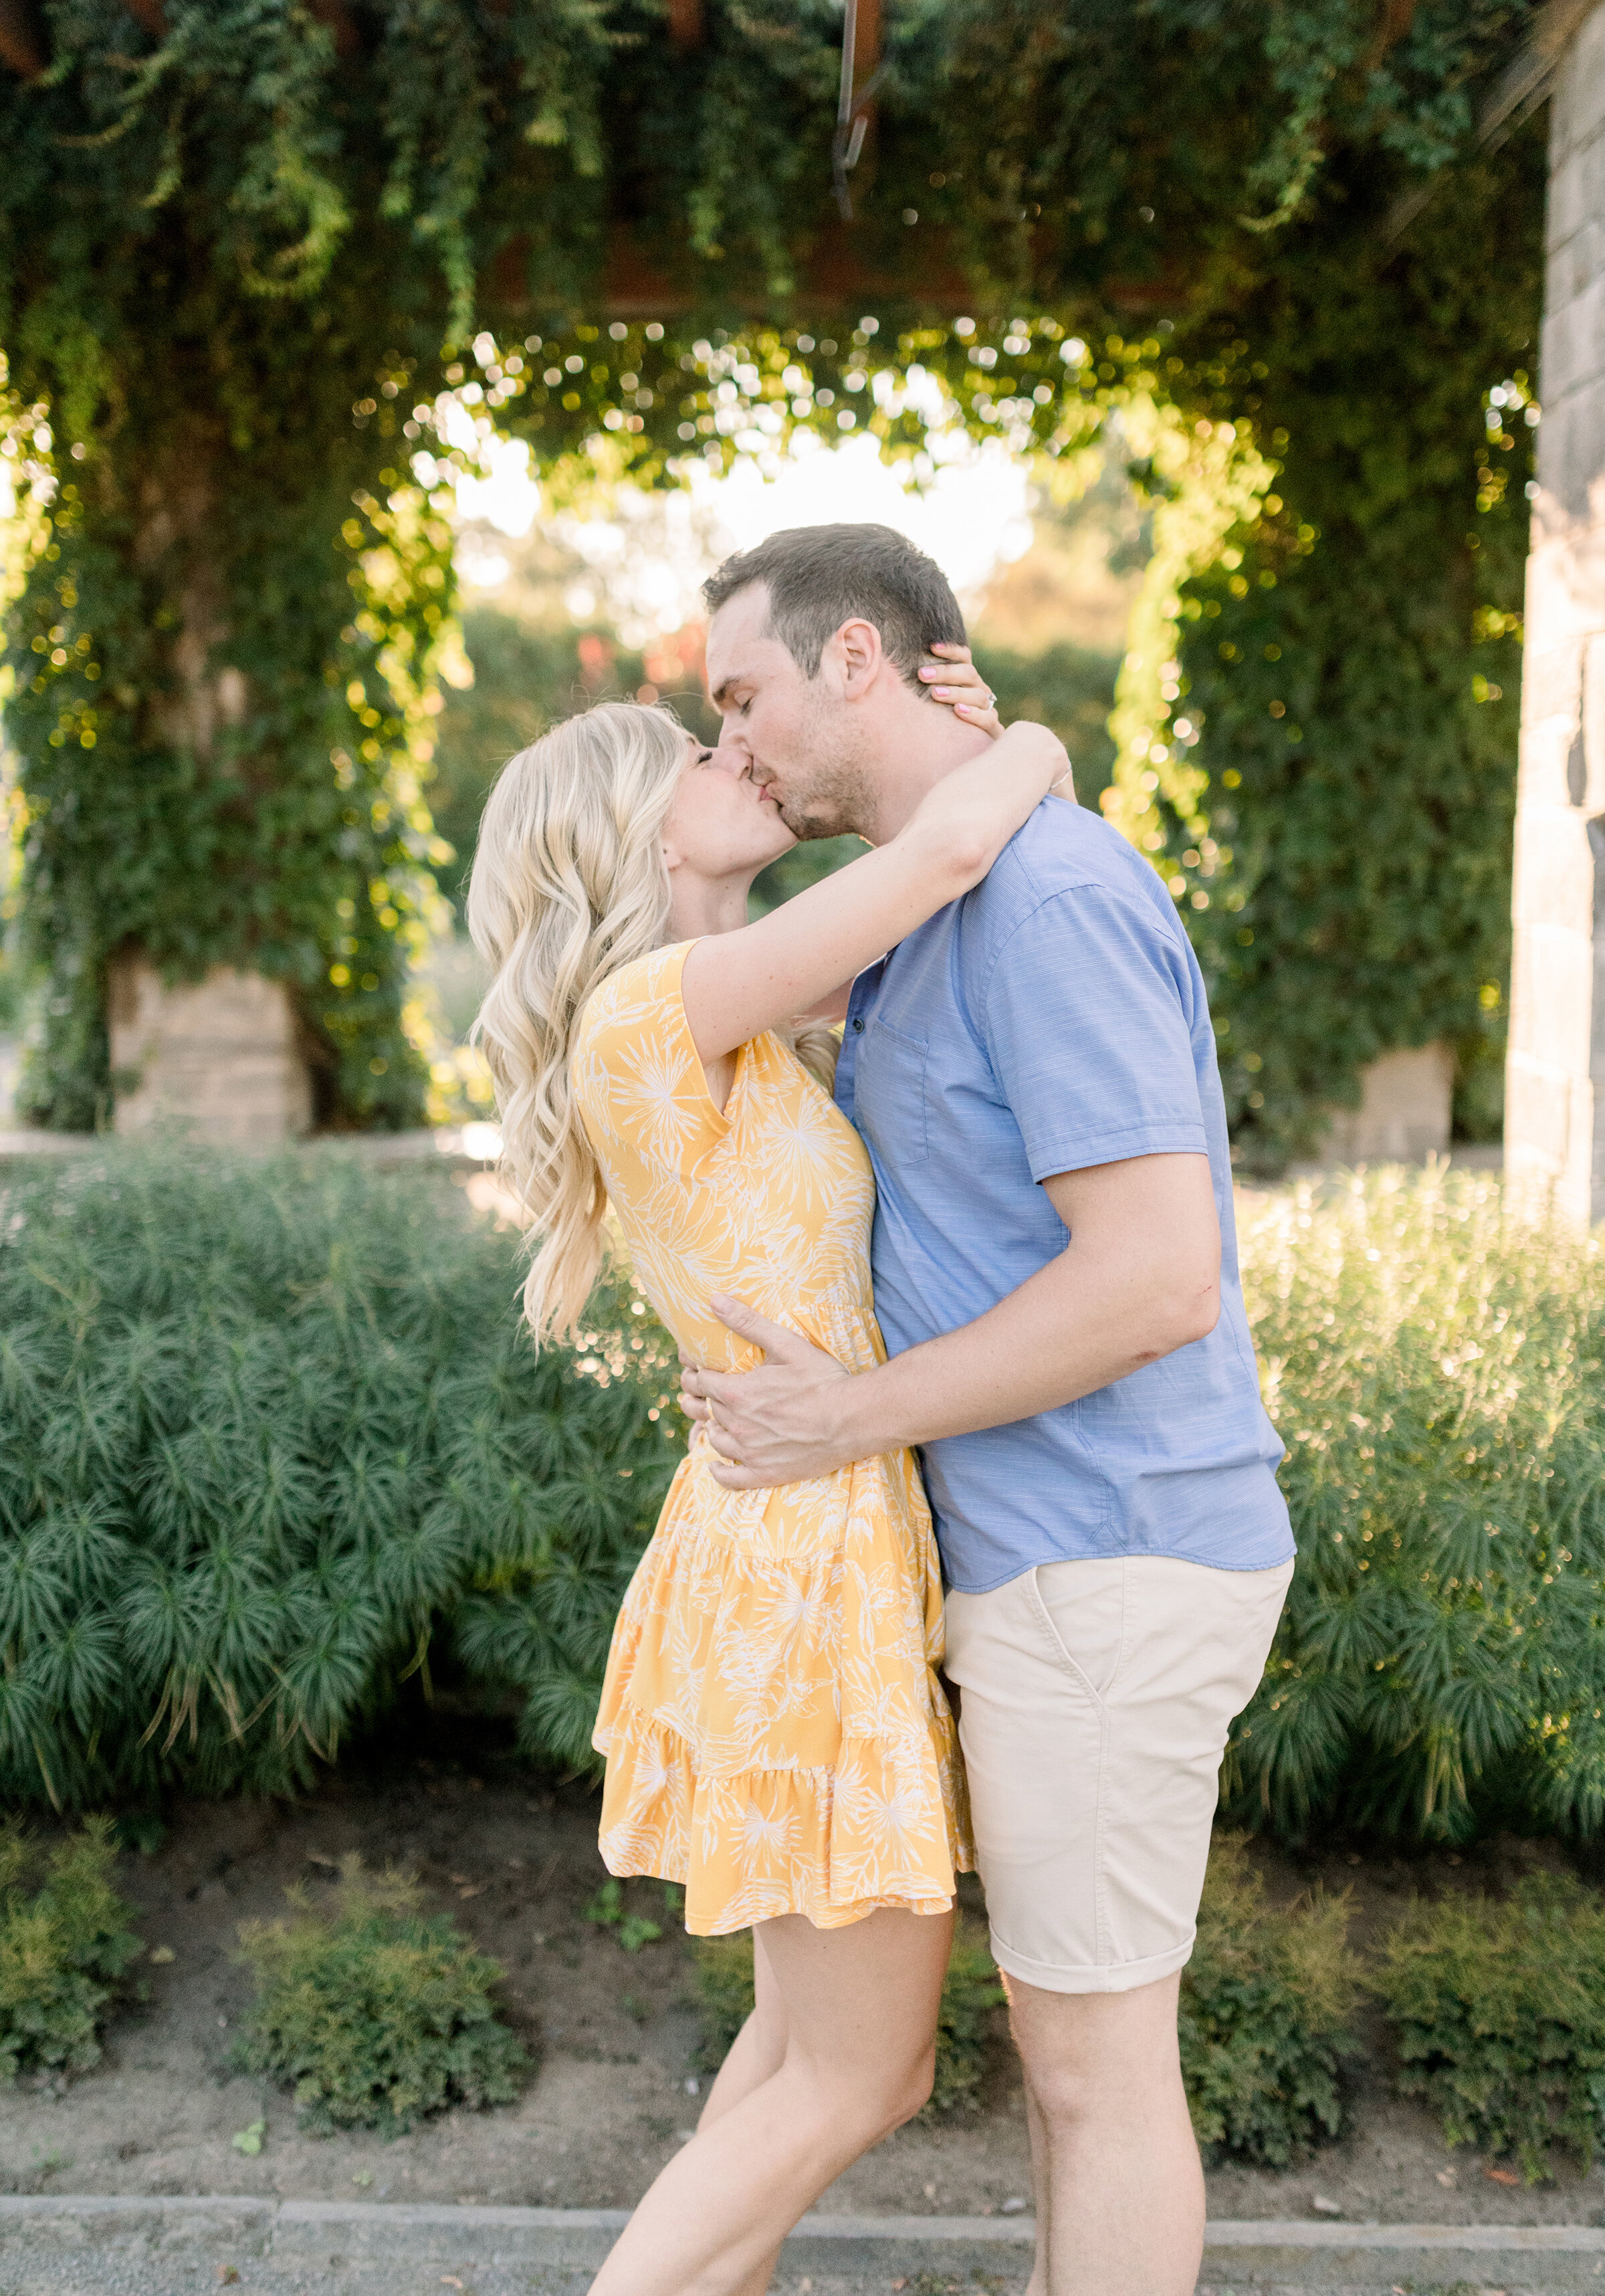  A glowing couple kiss under the vines at the Botanical Garden in a beautiful engagement session by Chelsea Mason Photography. Engagement session inspiration Montreal Canada photo shoot location ideas professional engagement photographer  couple pose